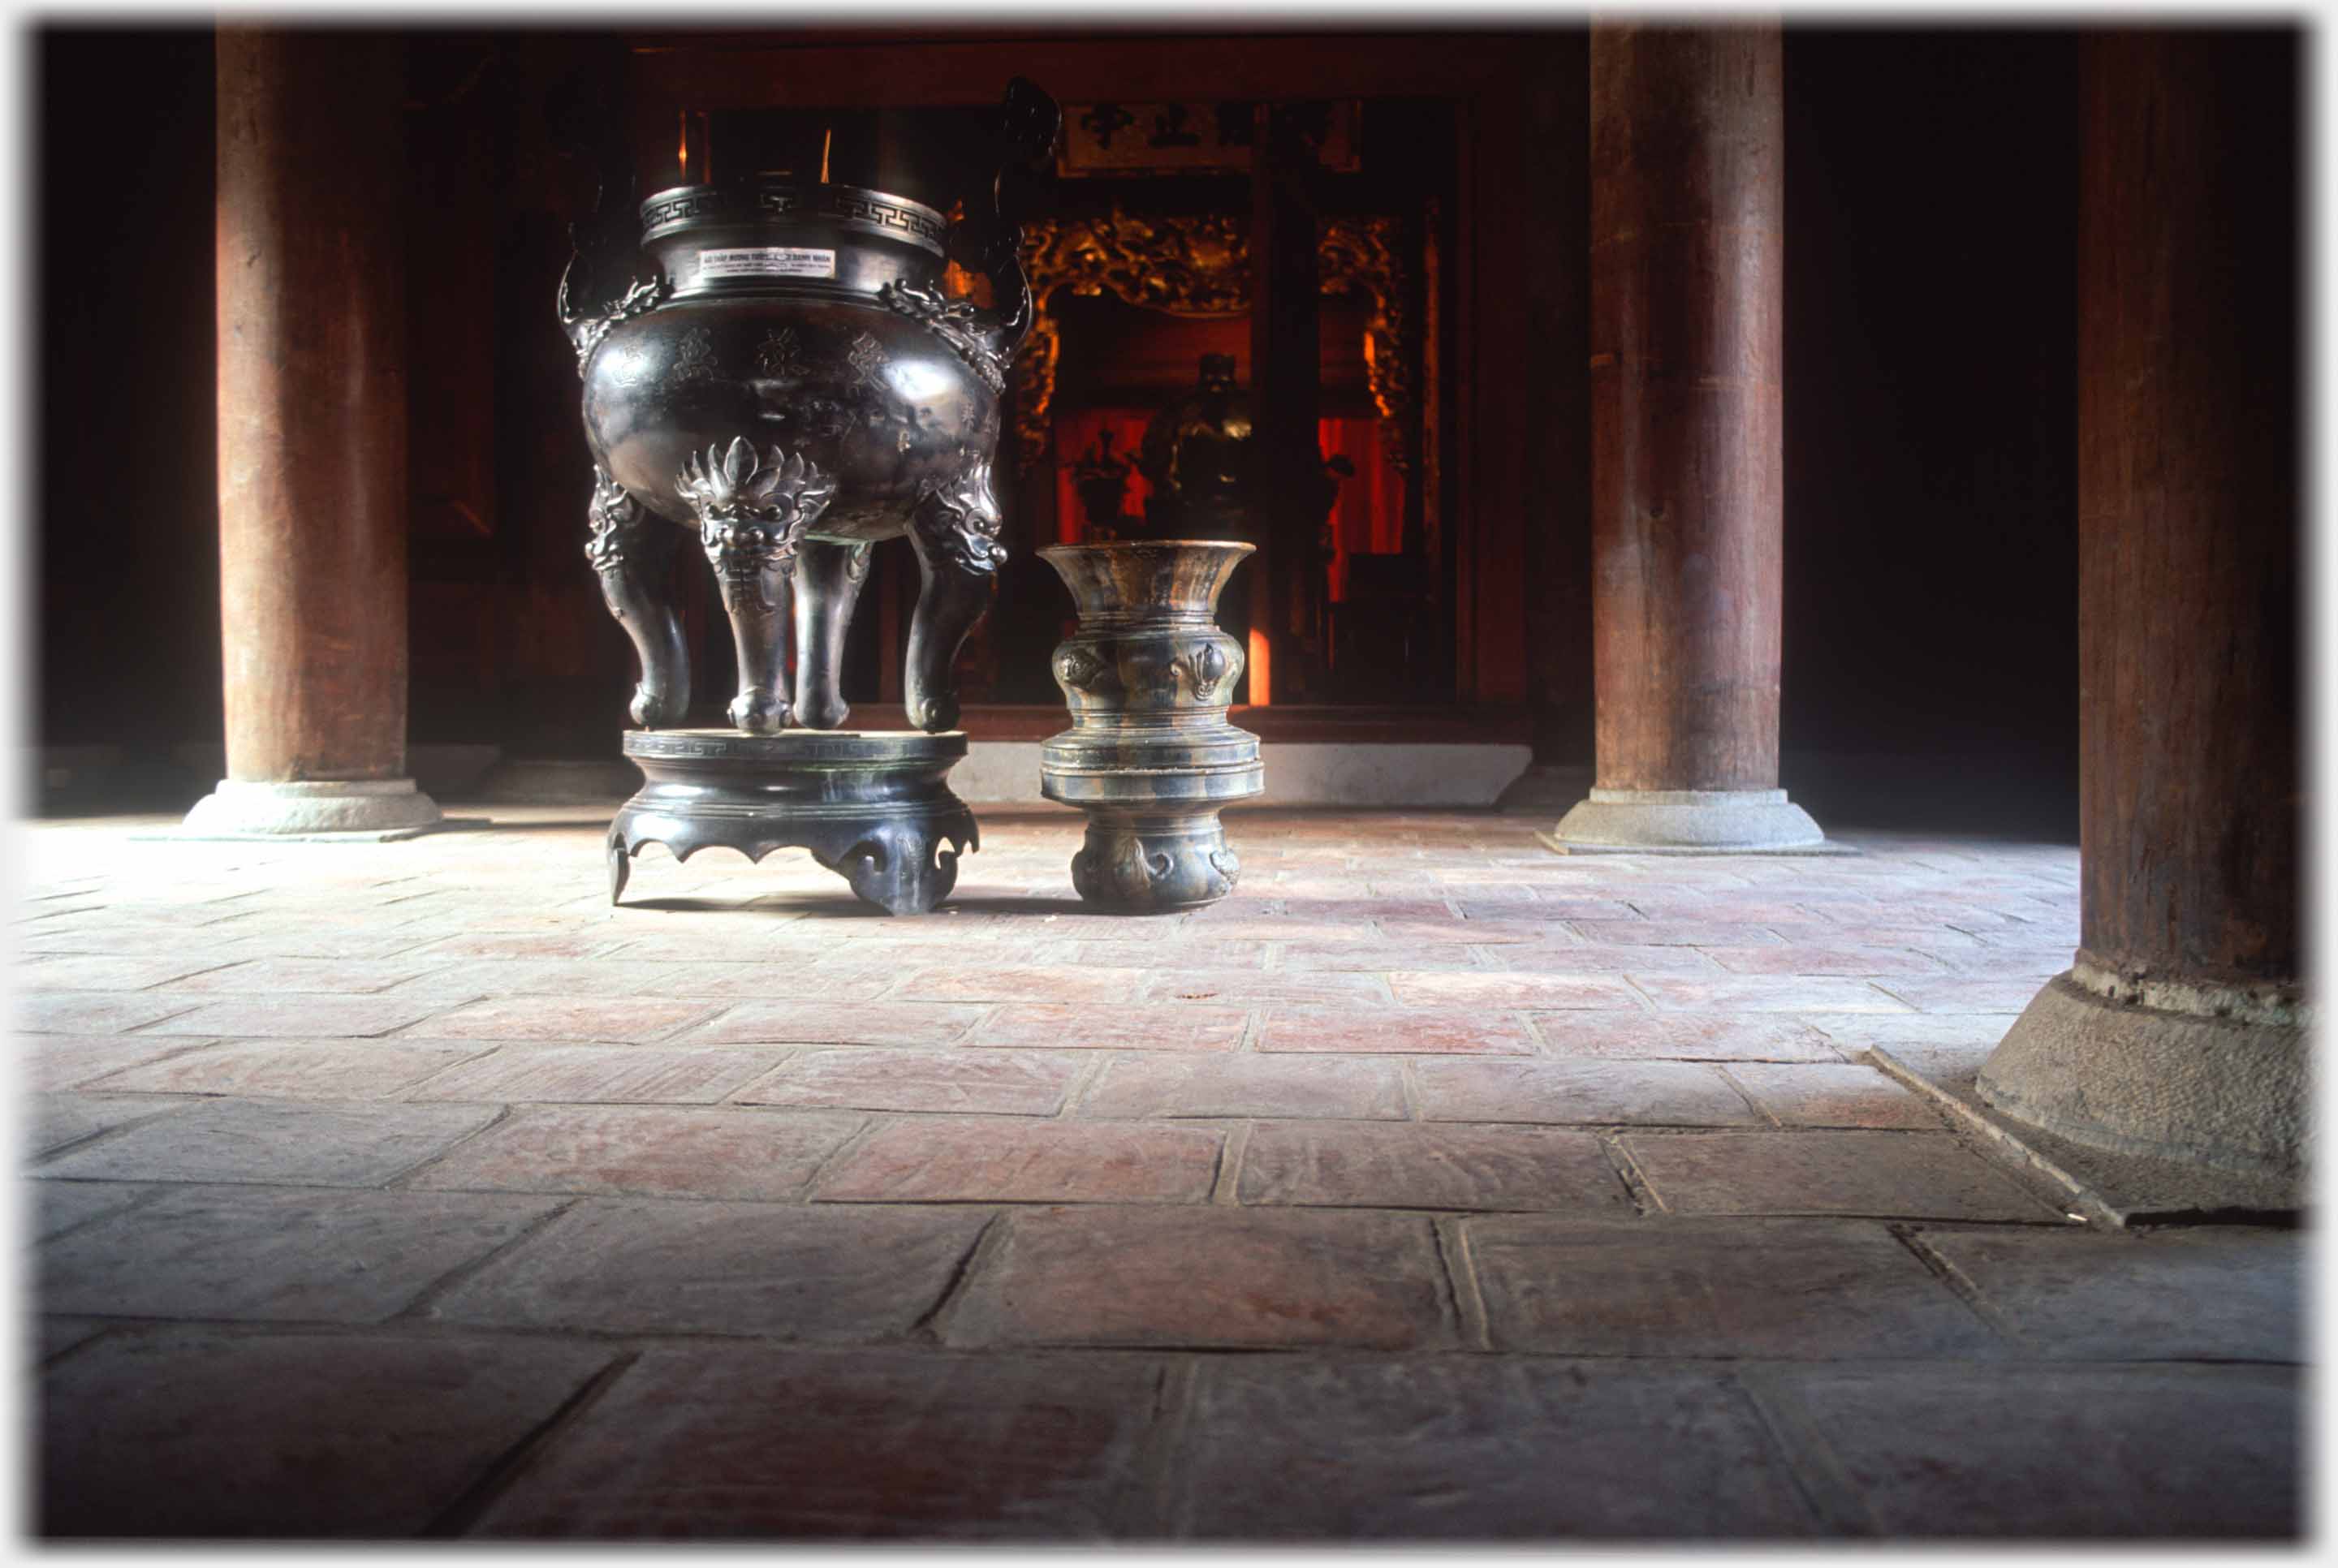 Large urn with small one beside it on floor between pillars, inner room just visible.